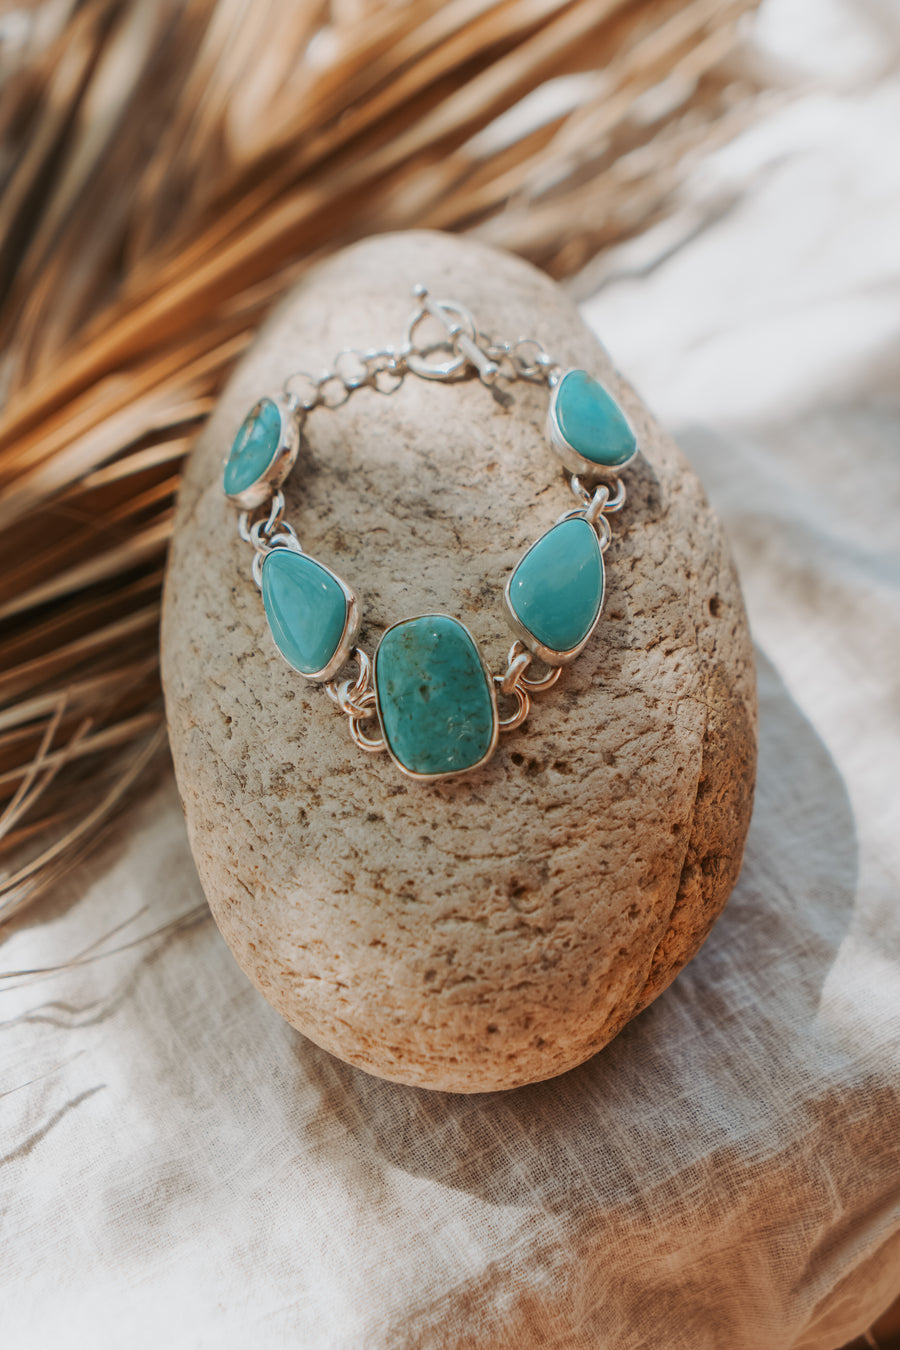 The Stepping Stone Bracelet in Campitos Turquoise